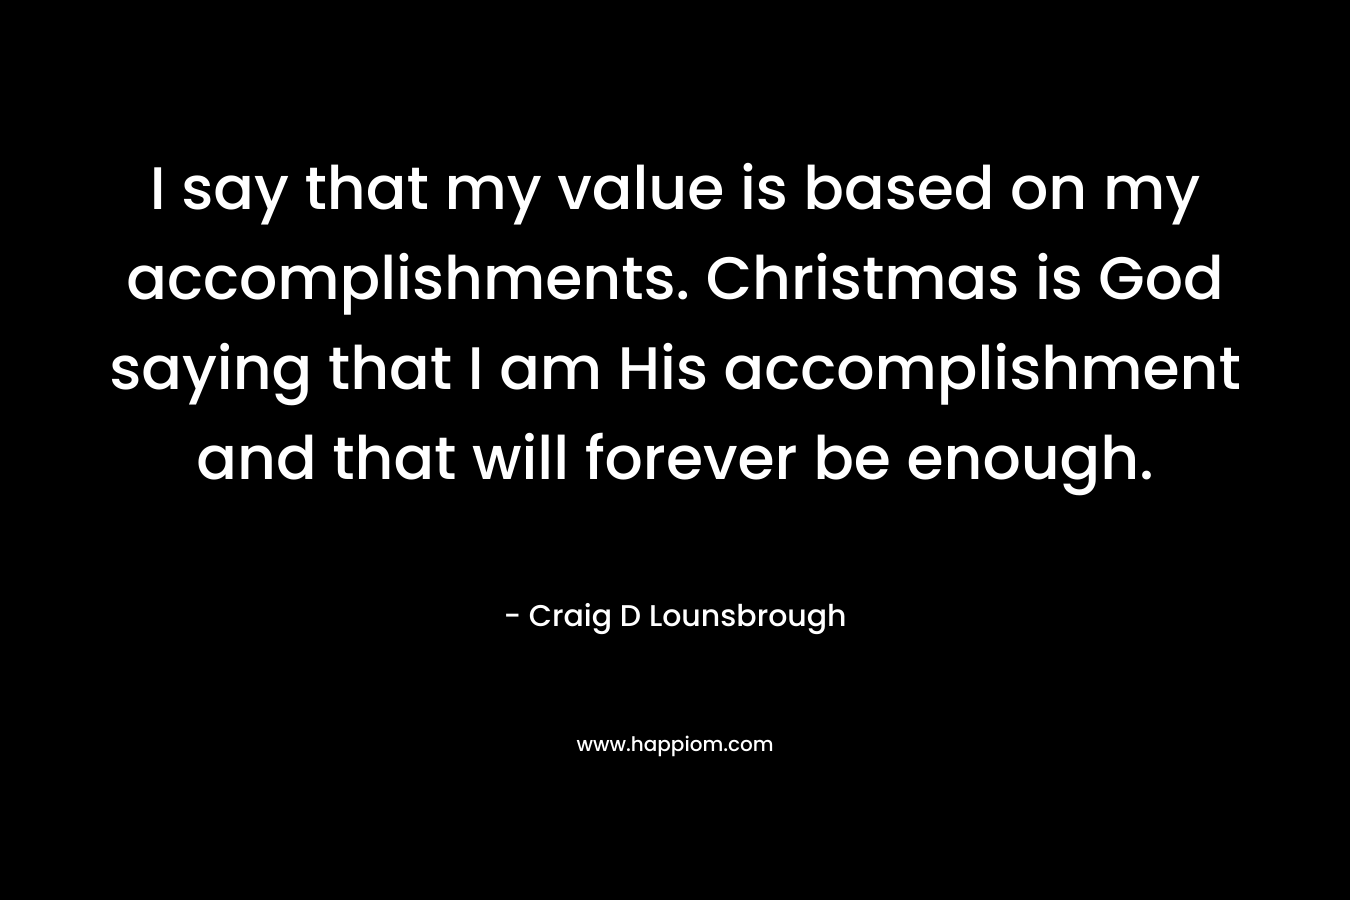 I say that my value is based on my accomplishments. Christmas is God saying that I am His accomplishment and that will forever be enough. – Craig D Lounsbrough